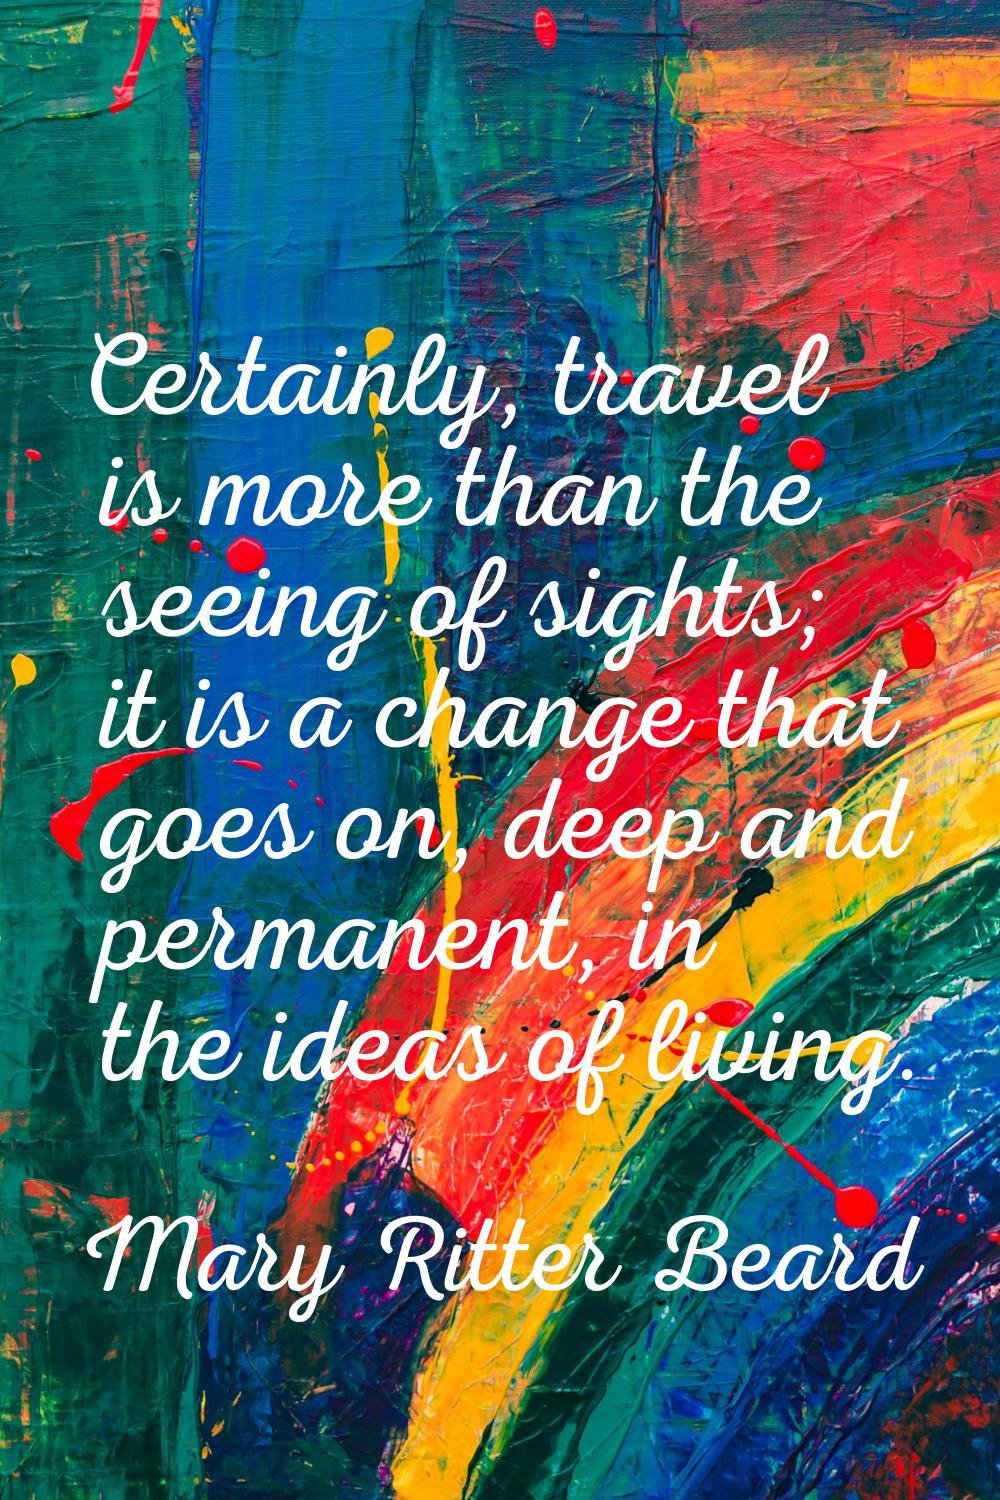 Certainly, travel is more than the seeing of sights; it is a change that goes on, deep and permanen